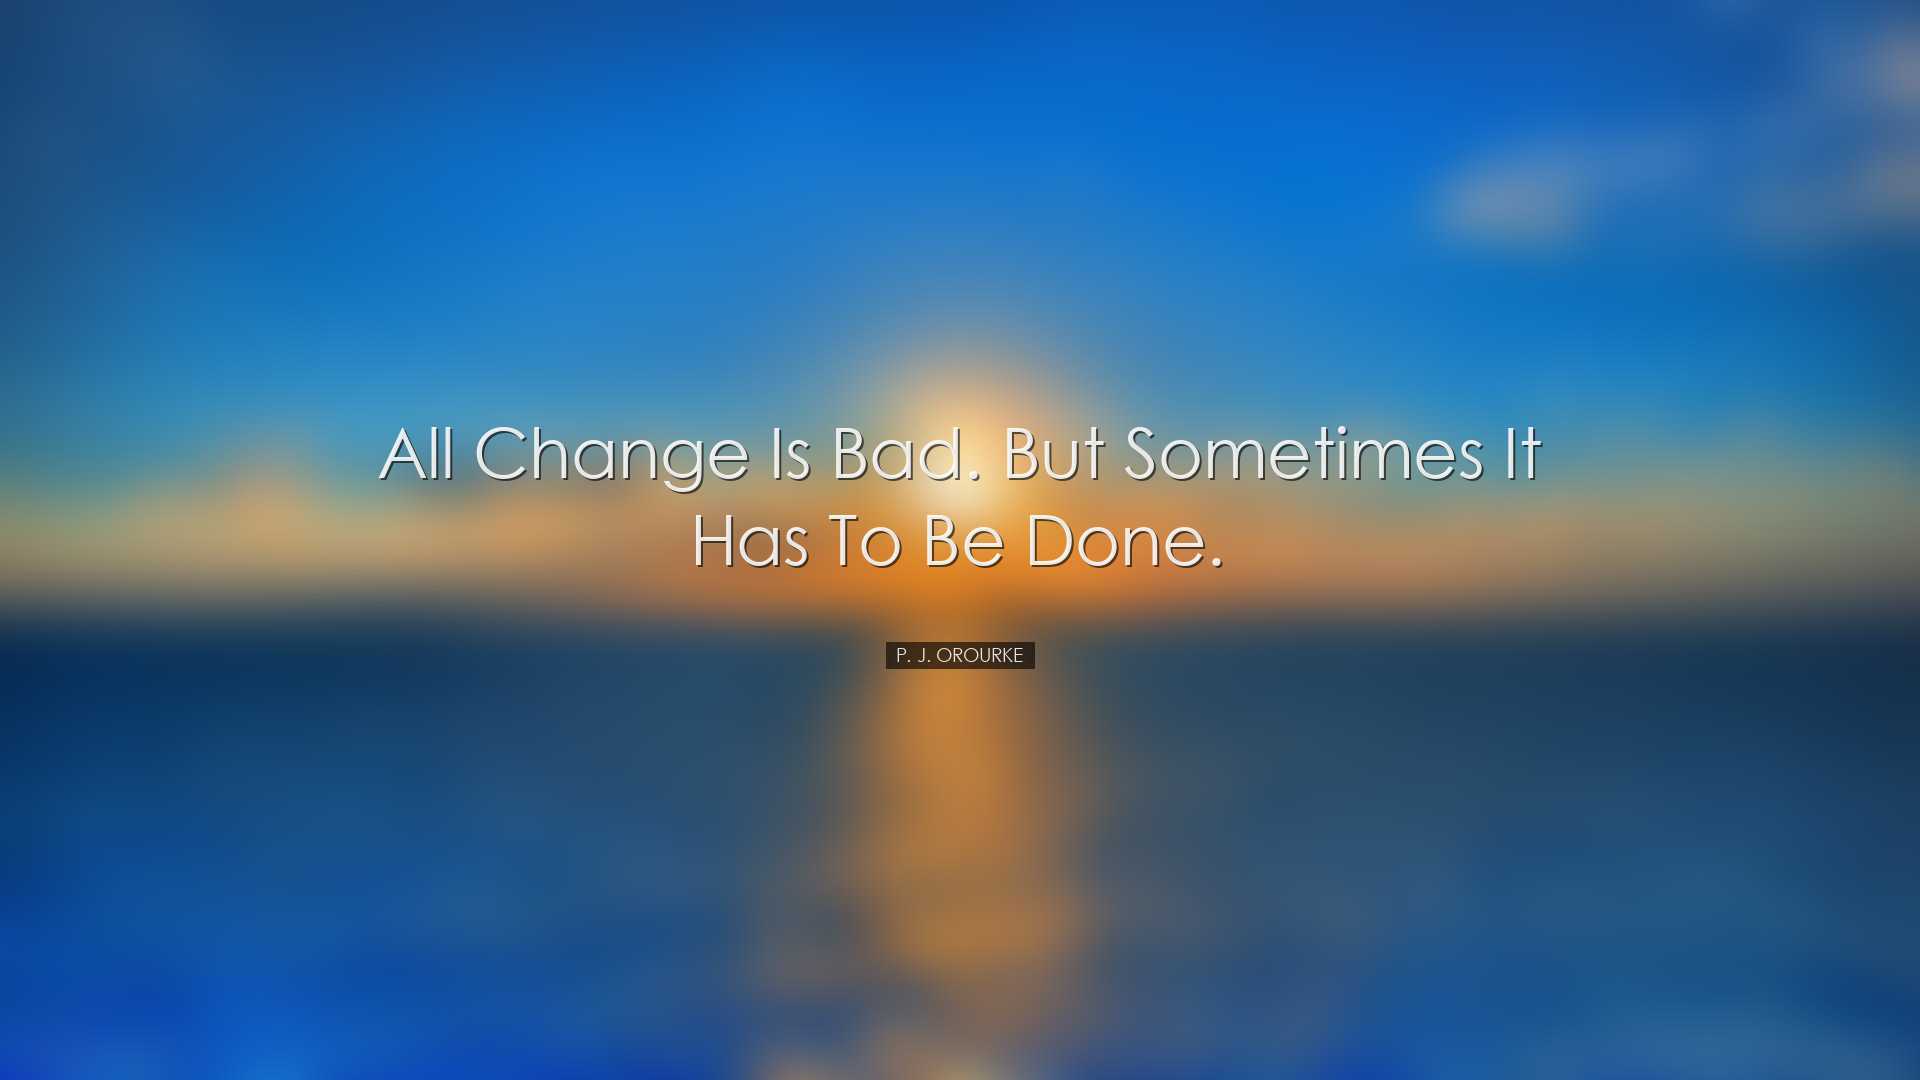 All change is bad. But sometimes it has to be done. - P. J. ORourk